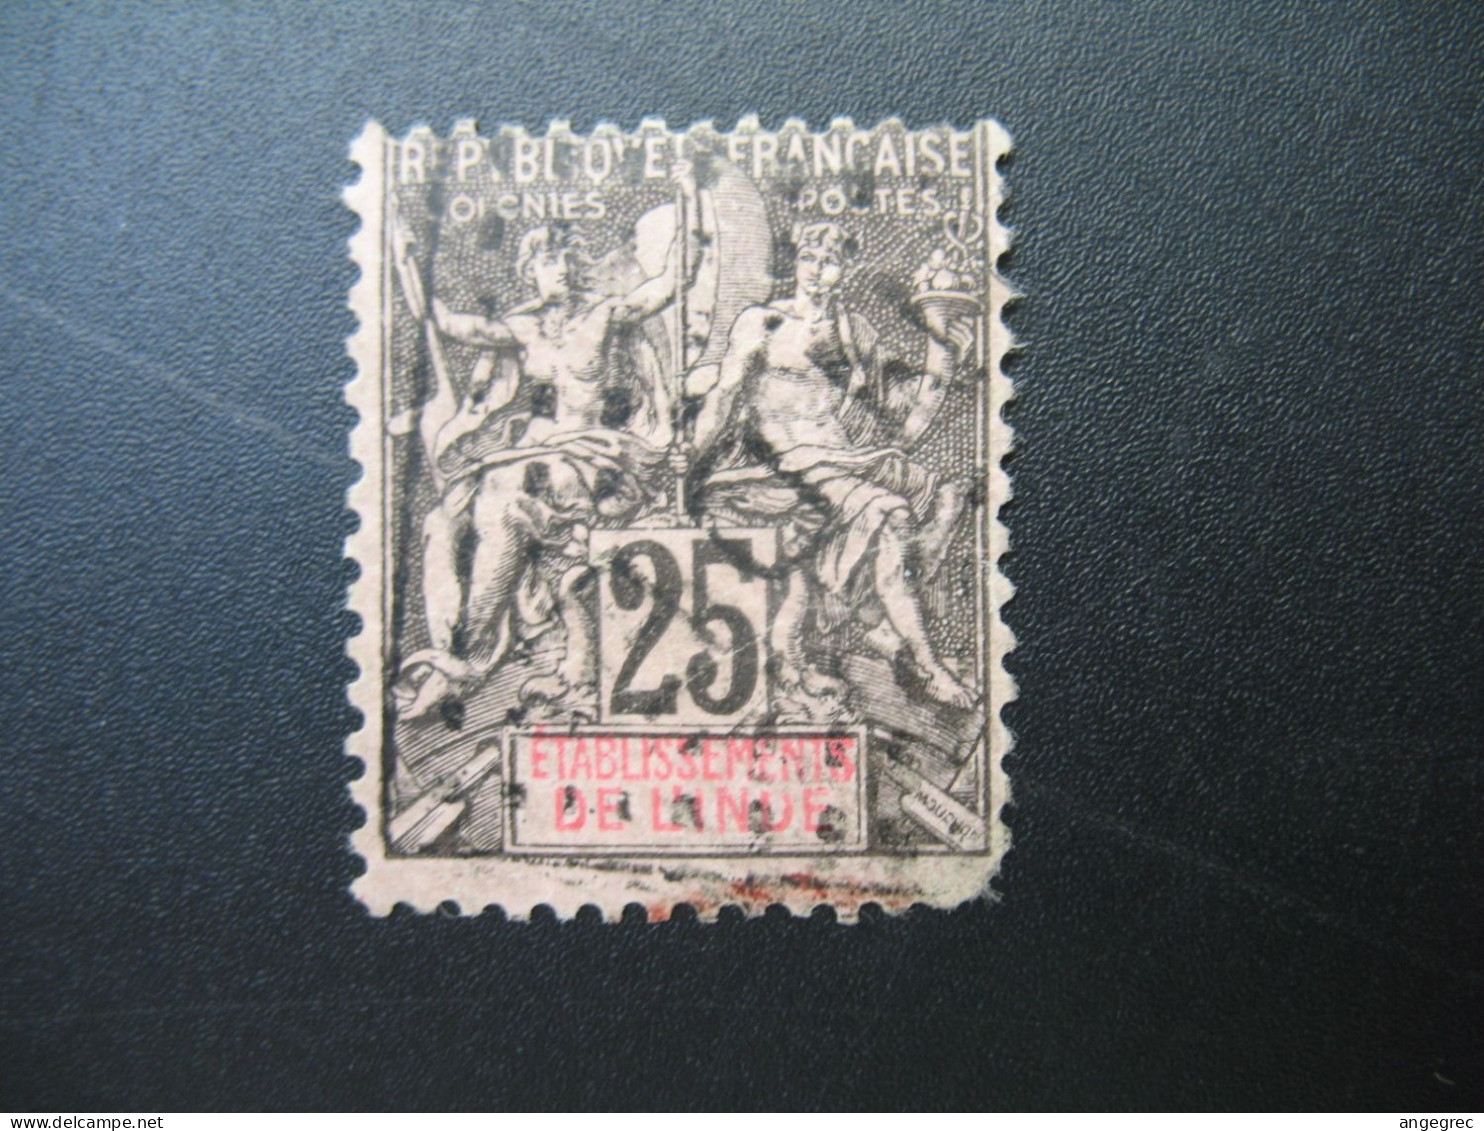 Inde Française Karikal Stamps French Colonies N° 8 Neuf * NSG Maury à Voir - Used Stamps